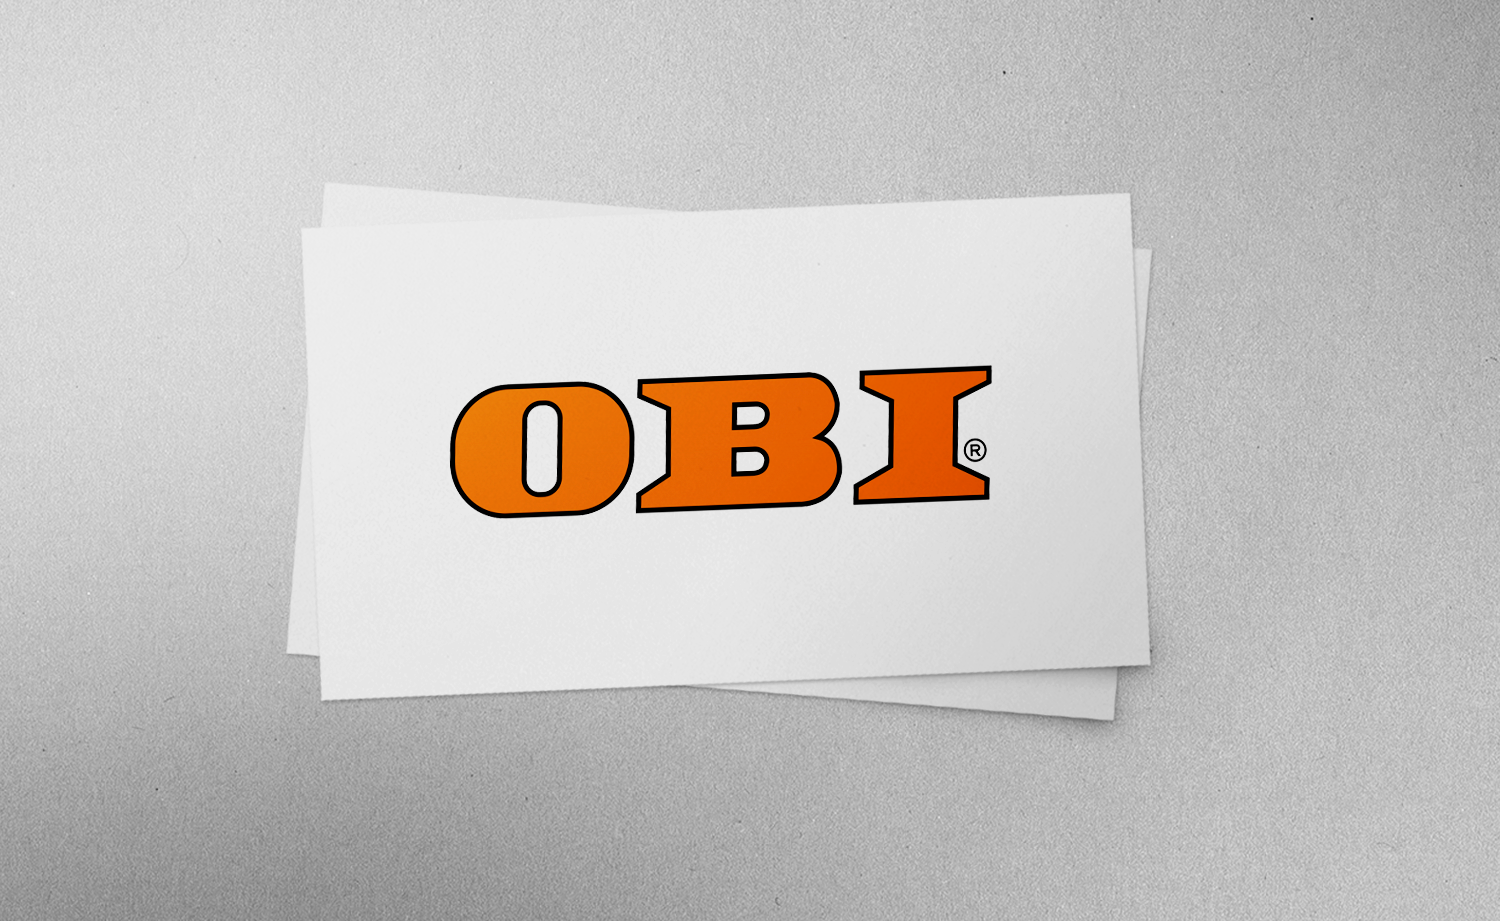 BPR will be responsible for OBI’s internet service